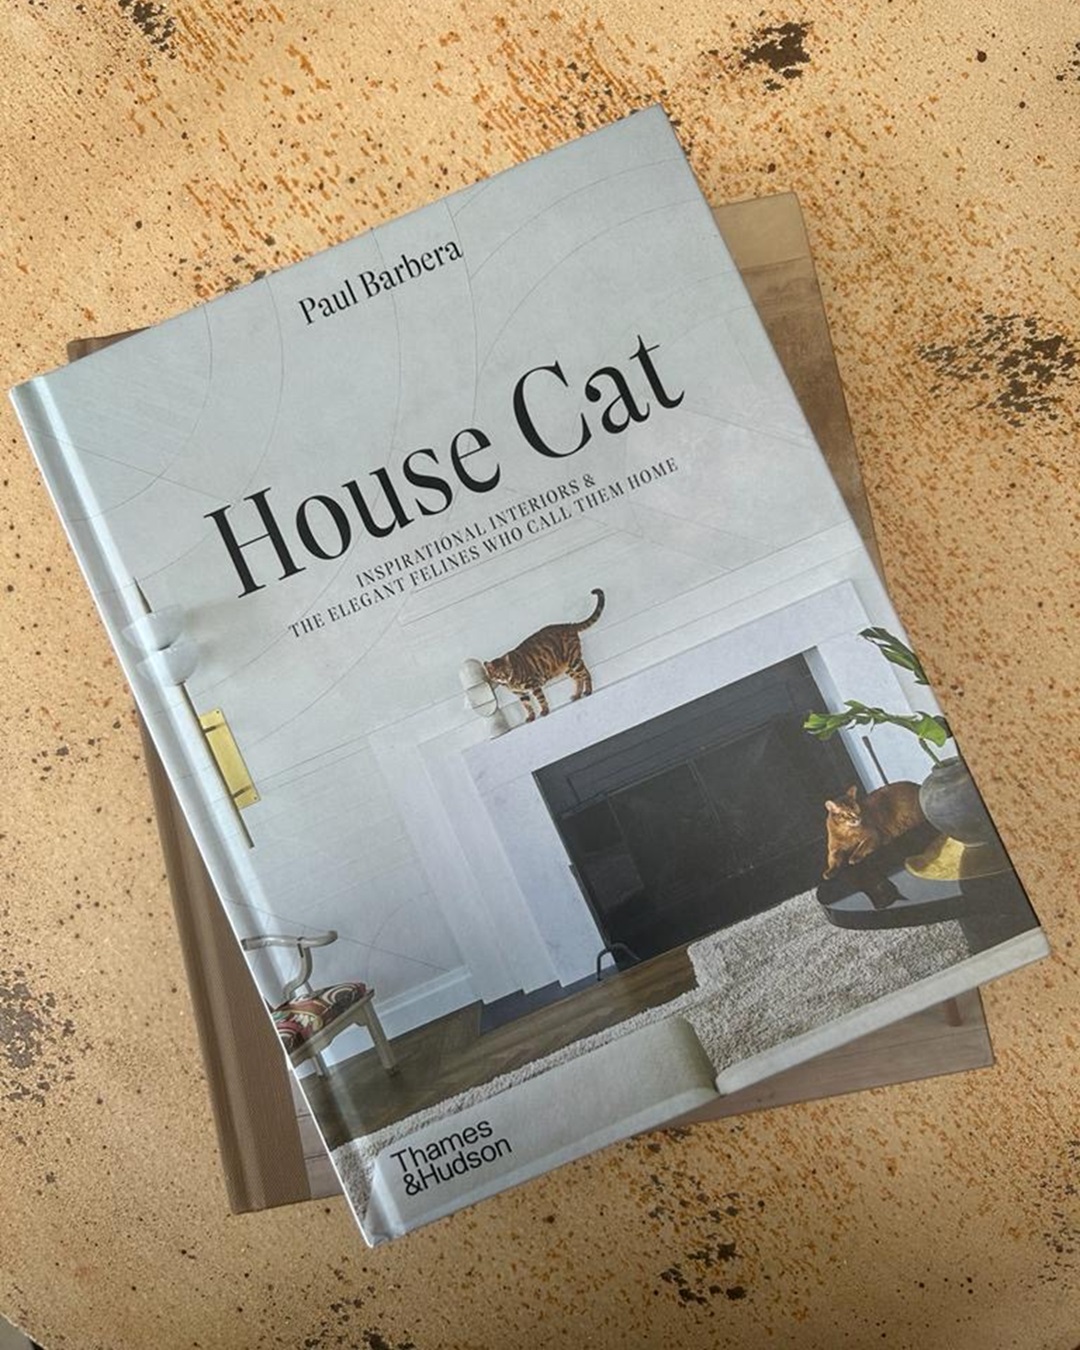 House of cat hardcover book on wooden table